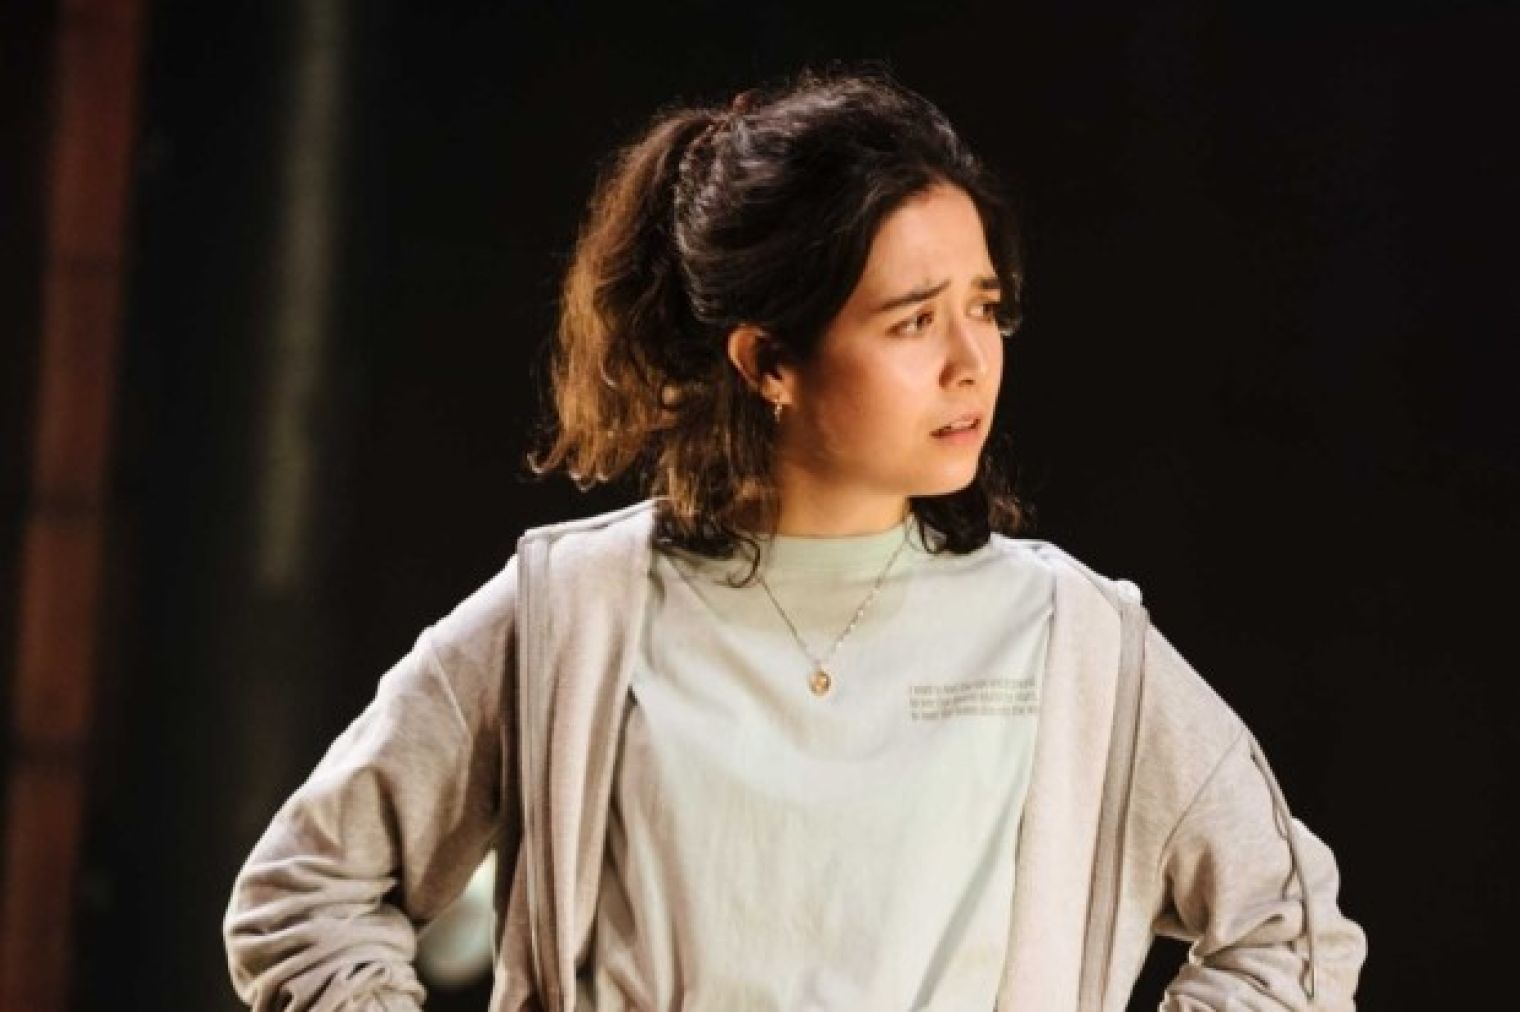 Norah Lopez-Holden has been nominated for the prestigious Ian Charleson Award 2022